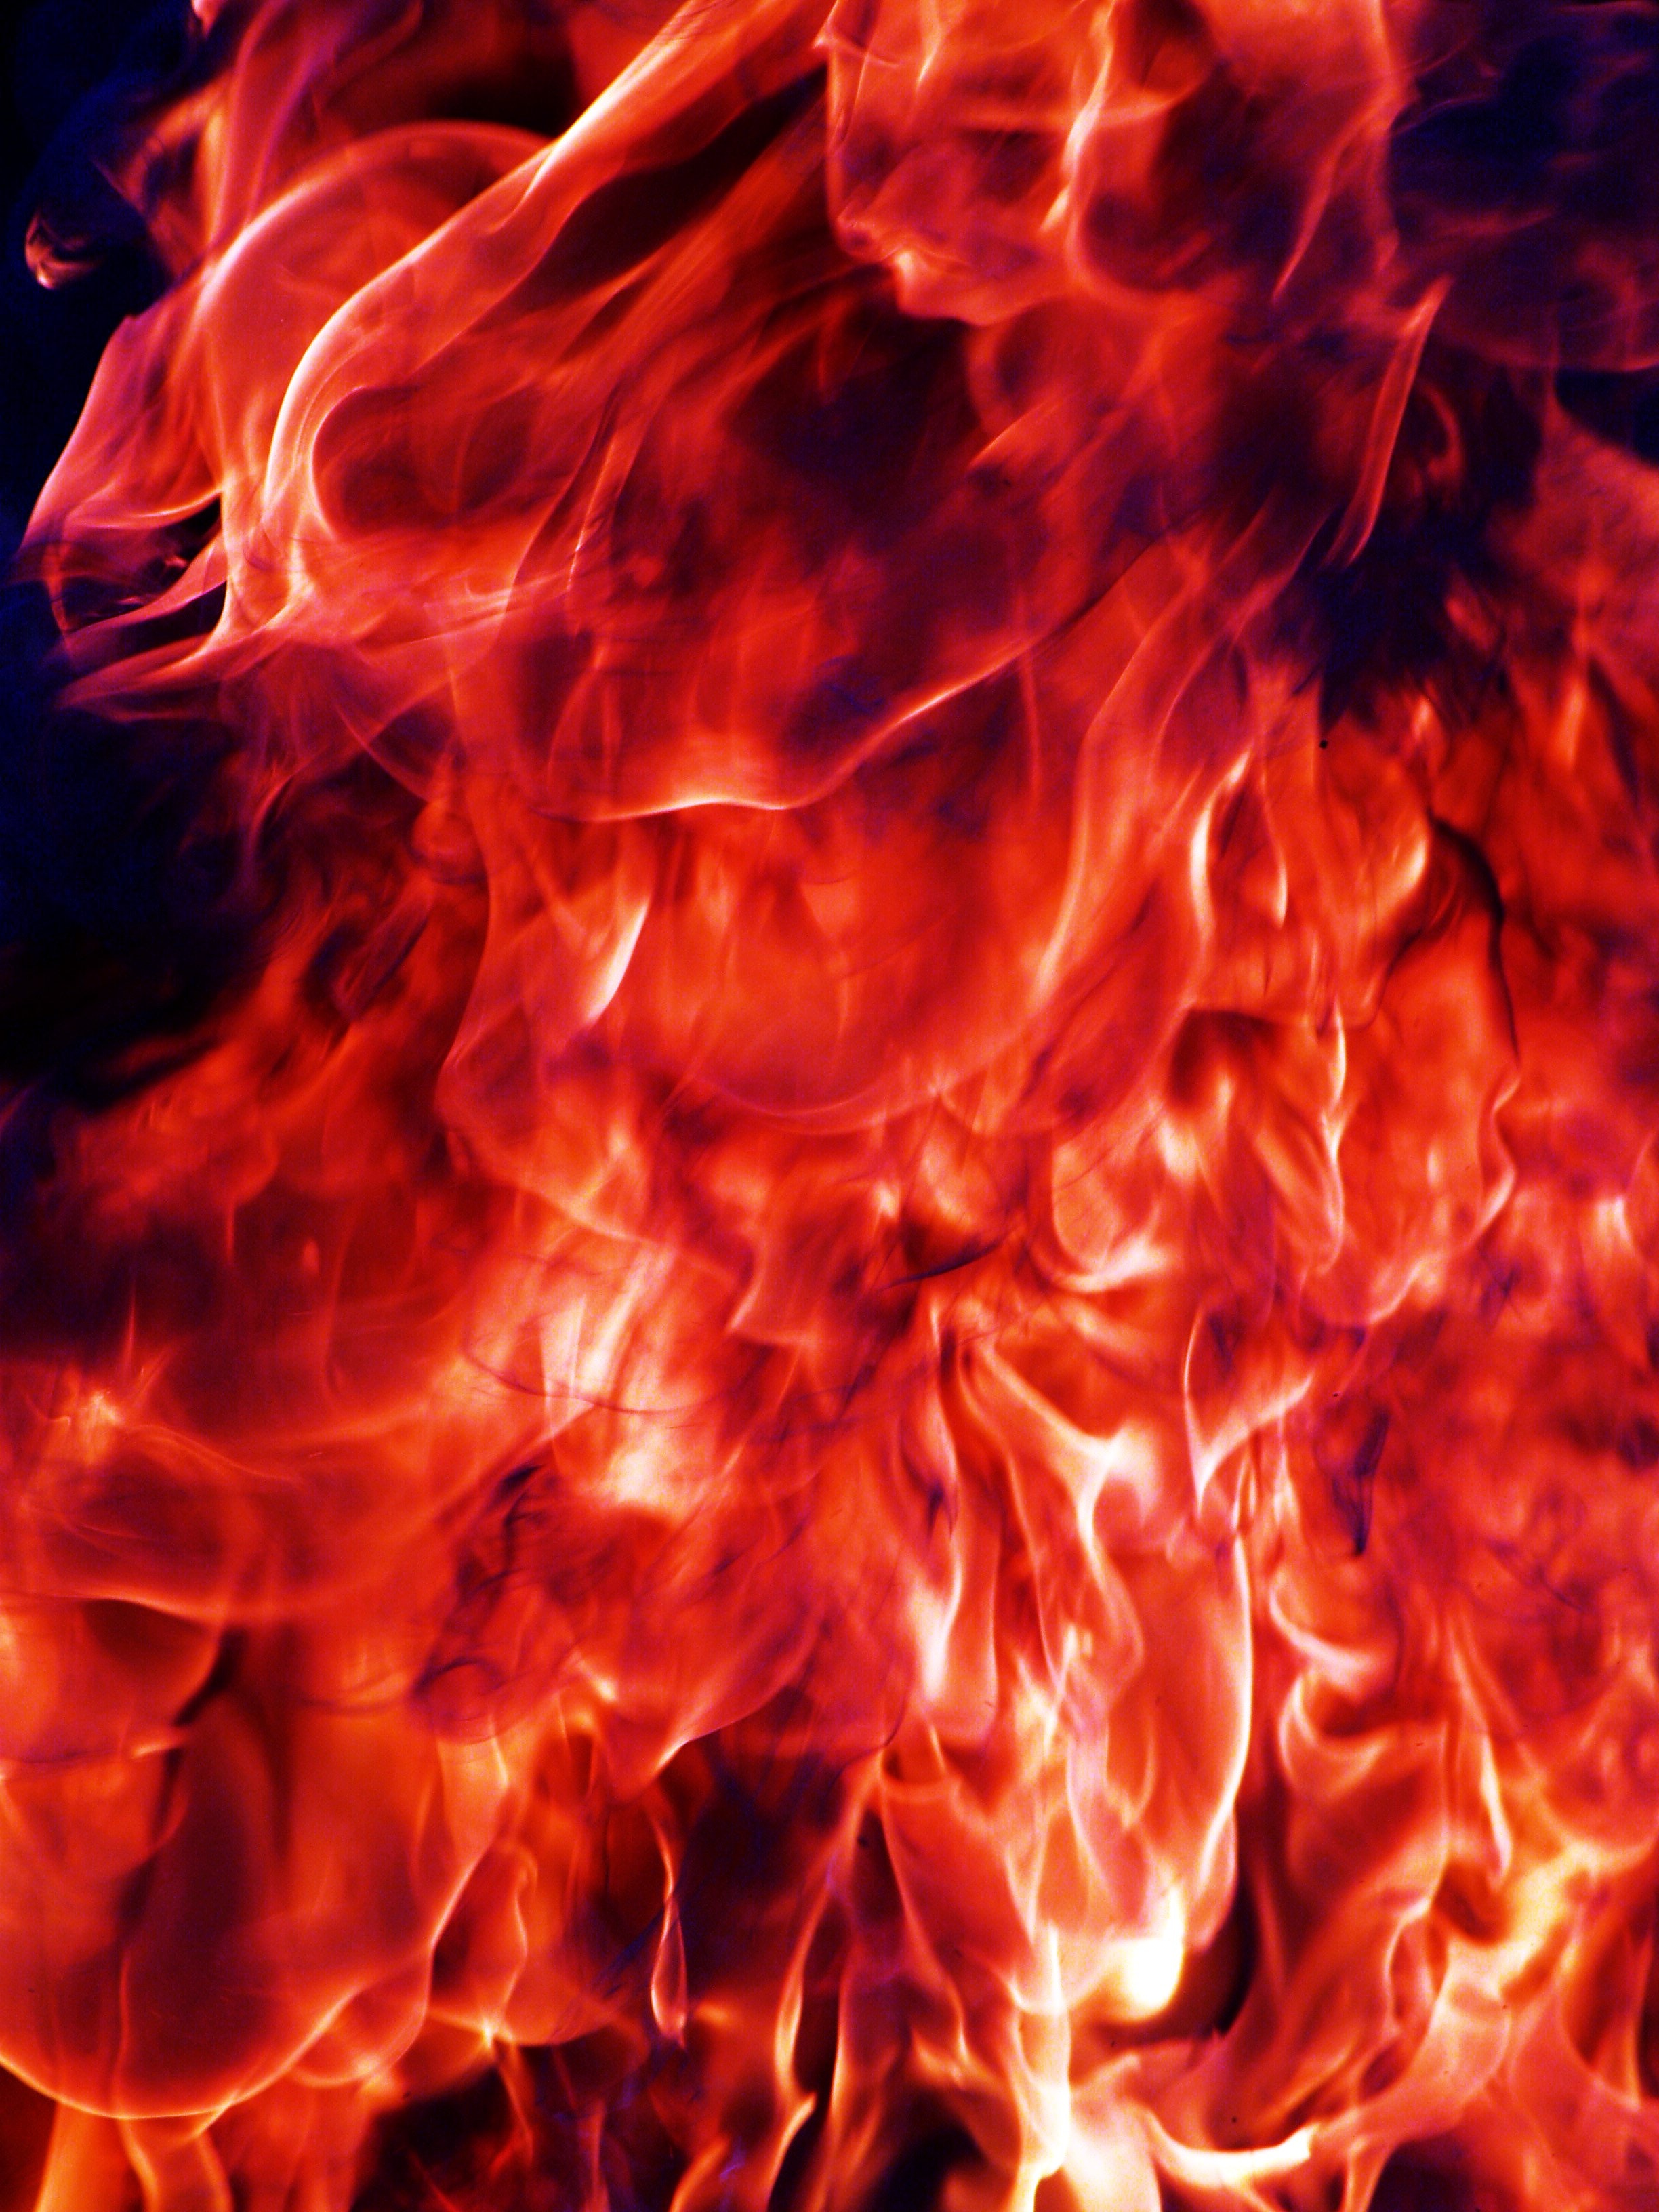 Similar Photos - Red Flames , HD Wallpaper & Backgrounds